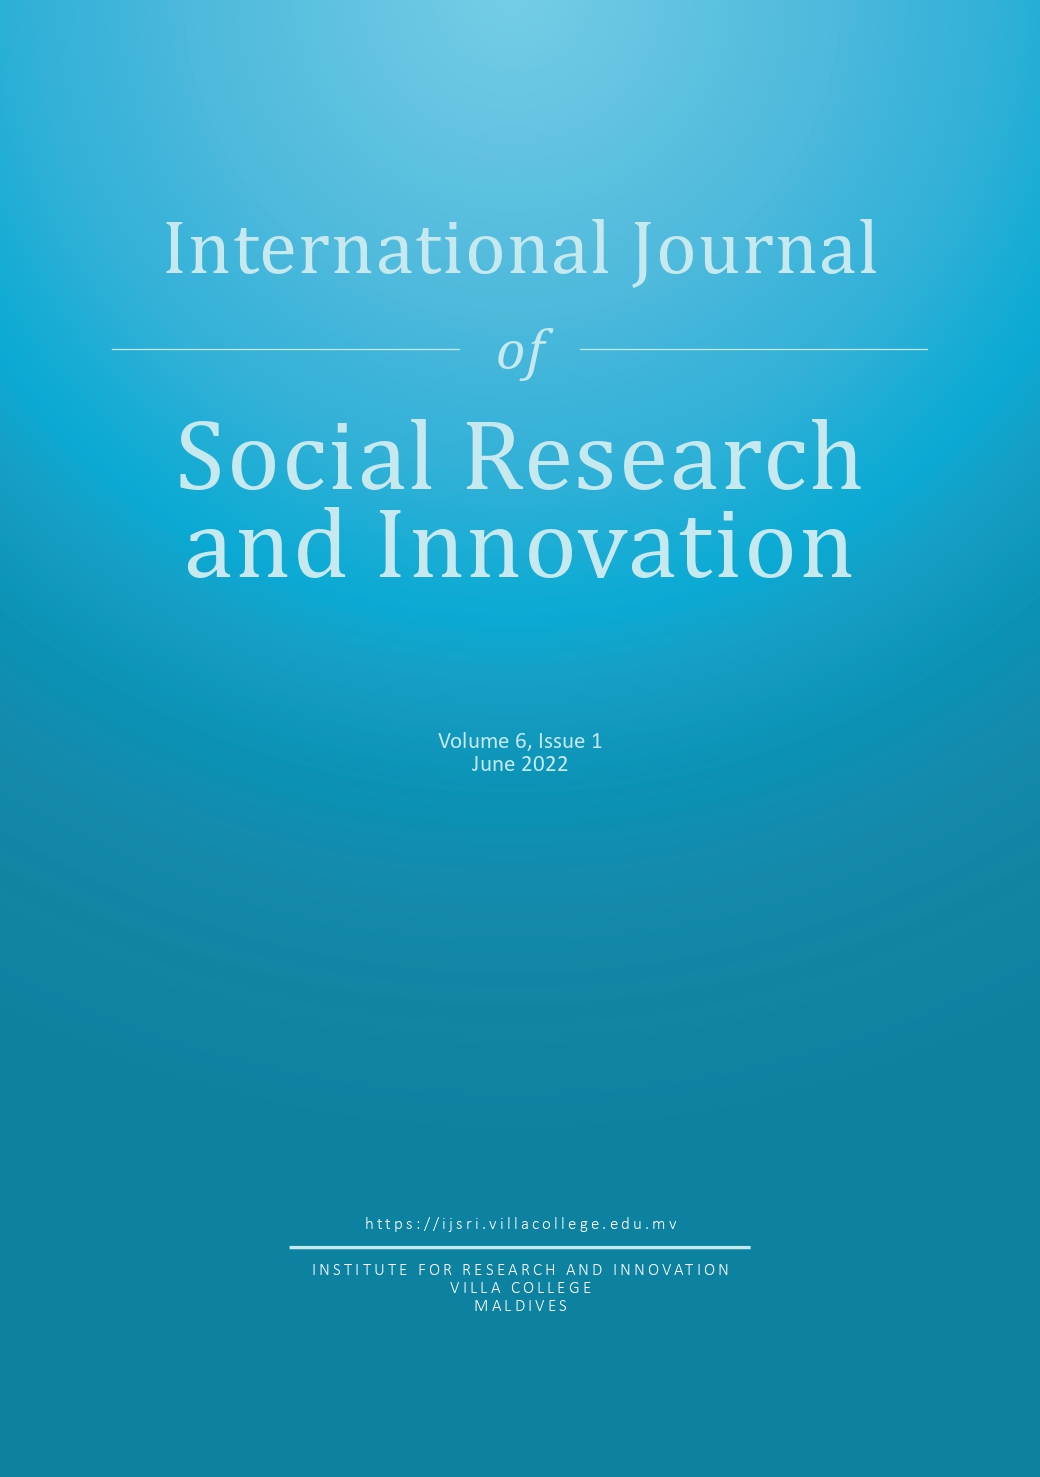 					View Vol. 6 No. 1 (2022): International Journal of Social Research and Innovation
				